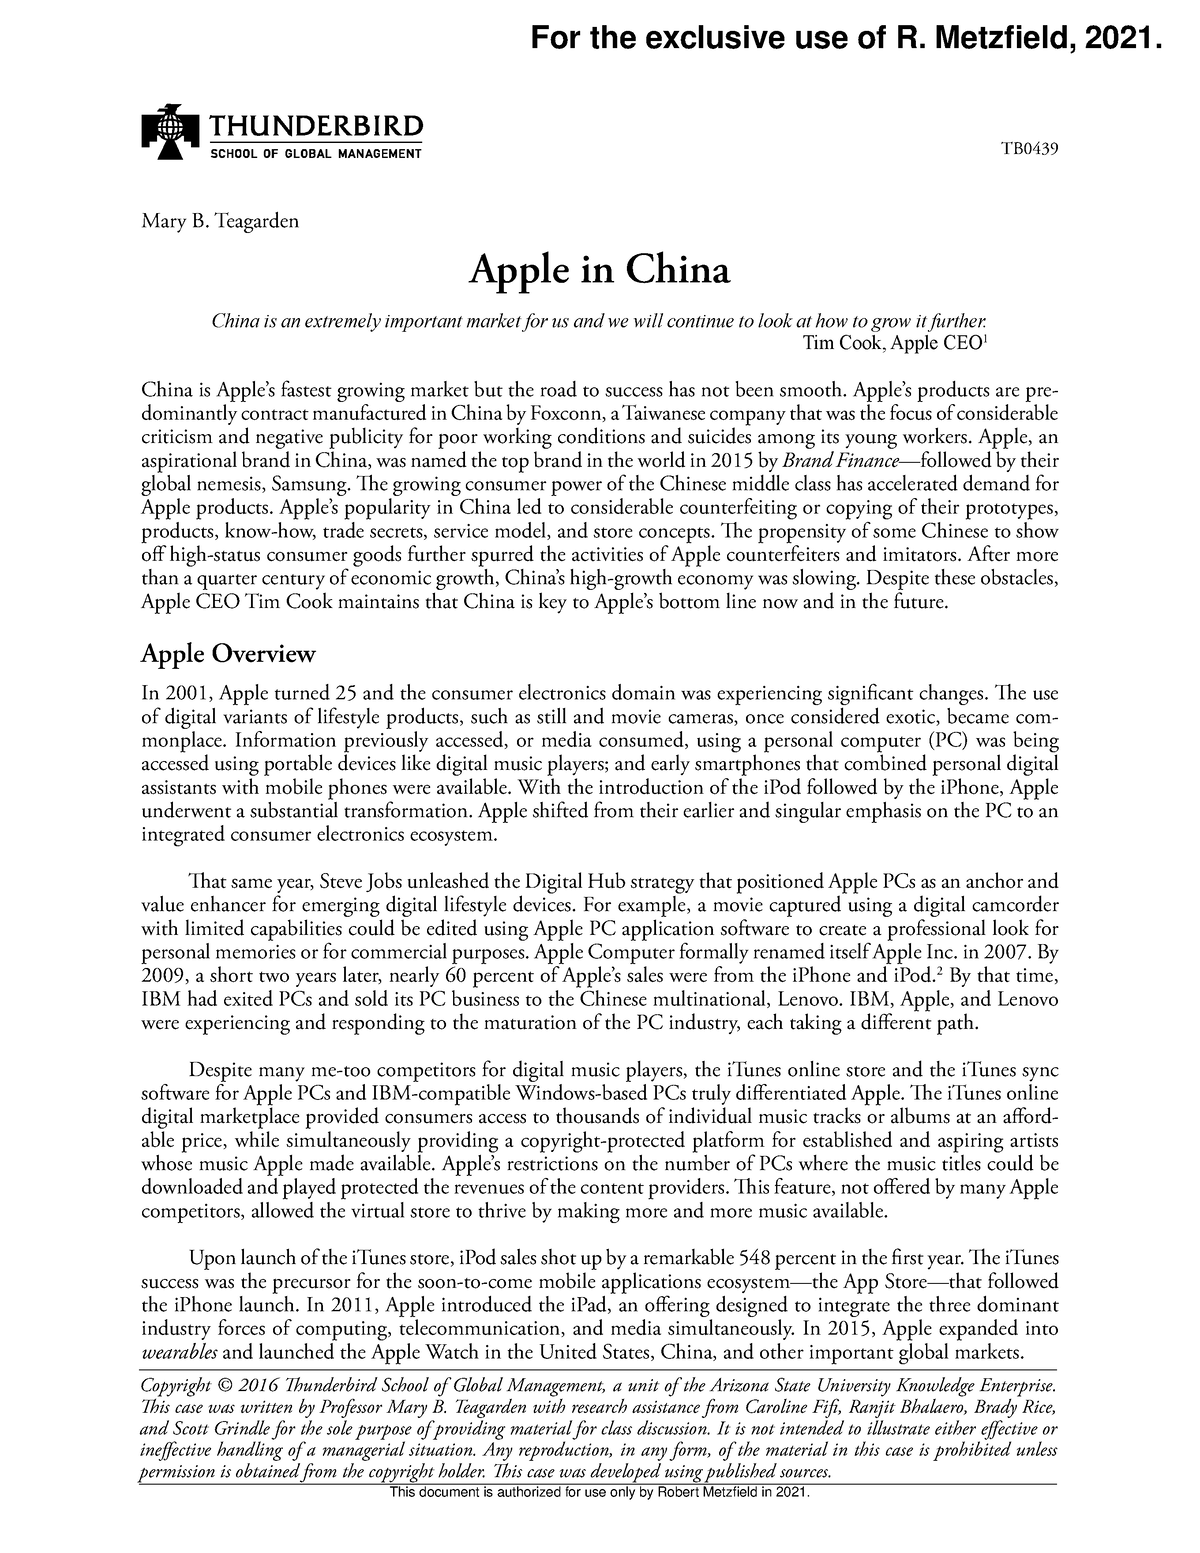 apple in china case study